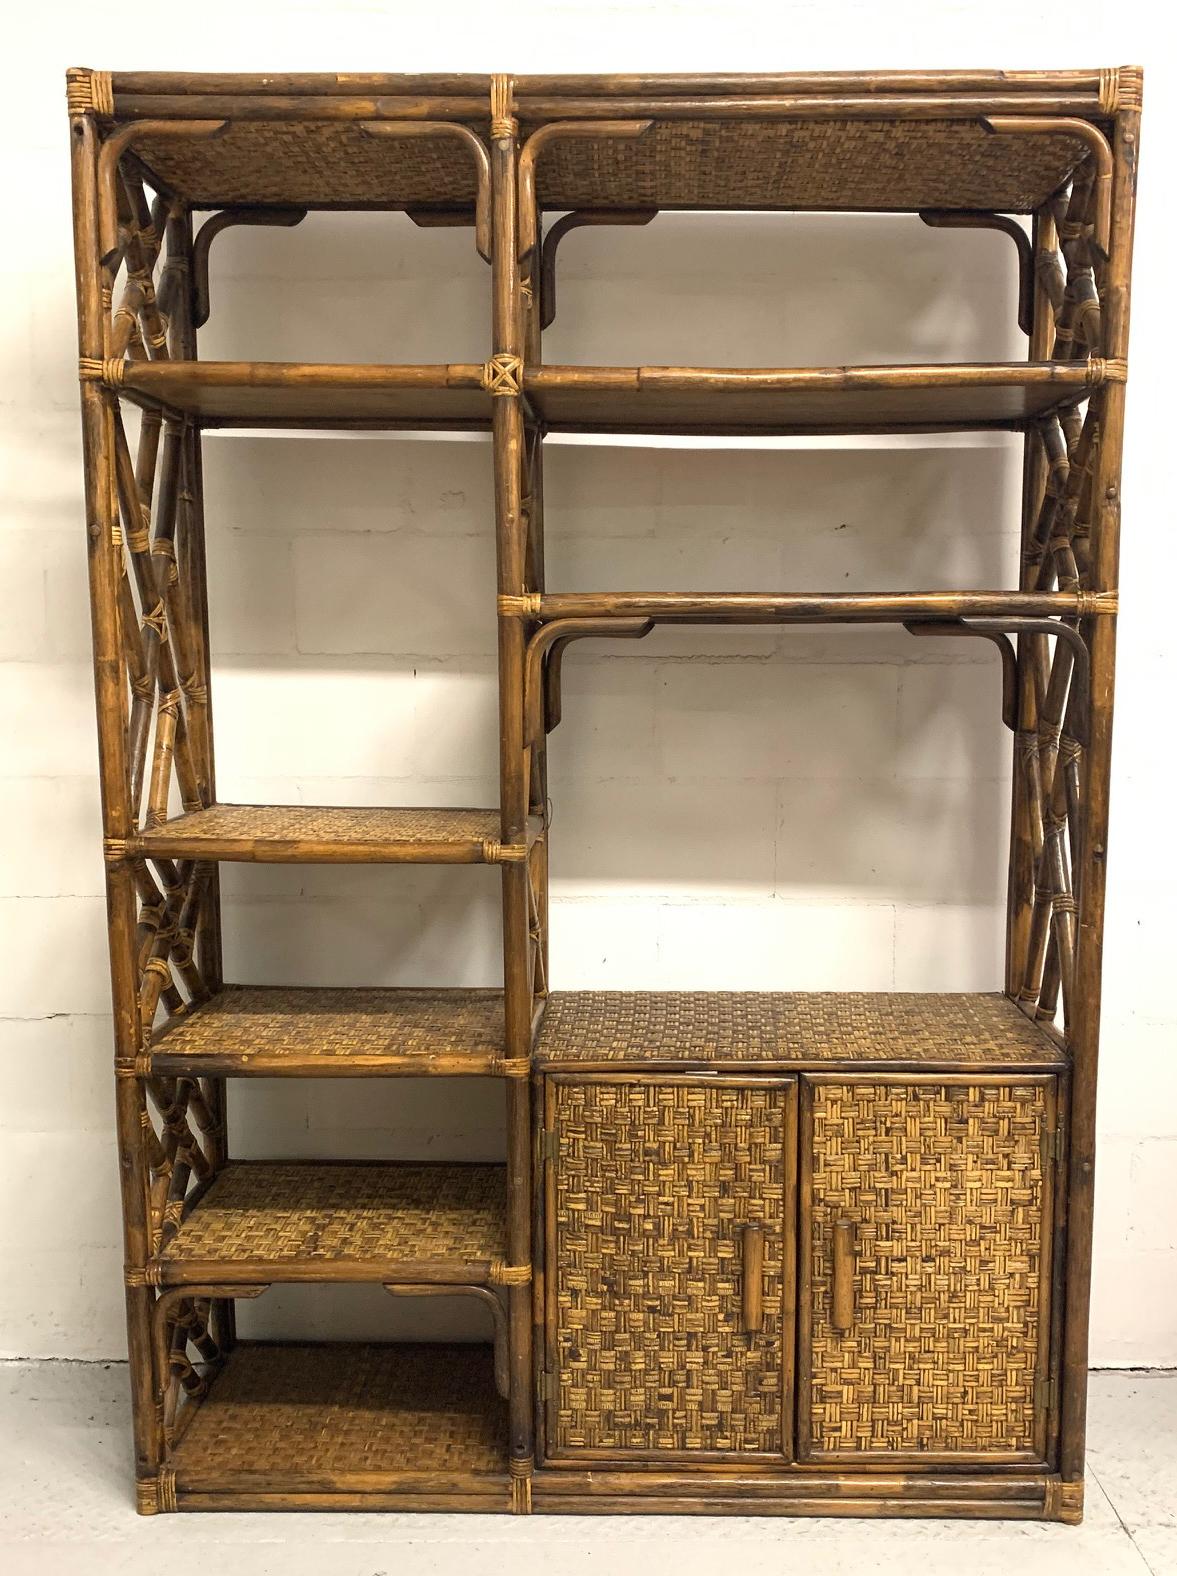 Rattan étagère in the Chinese Chippendale style features a rich, dark finish and woven rattan shelving. Double doors reveal more storage. Very heavy and sound, this piece shows construction of the highest standard. Very good vintage condition with